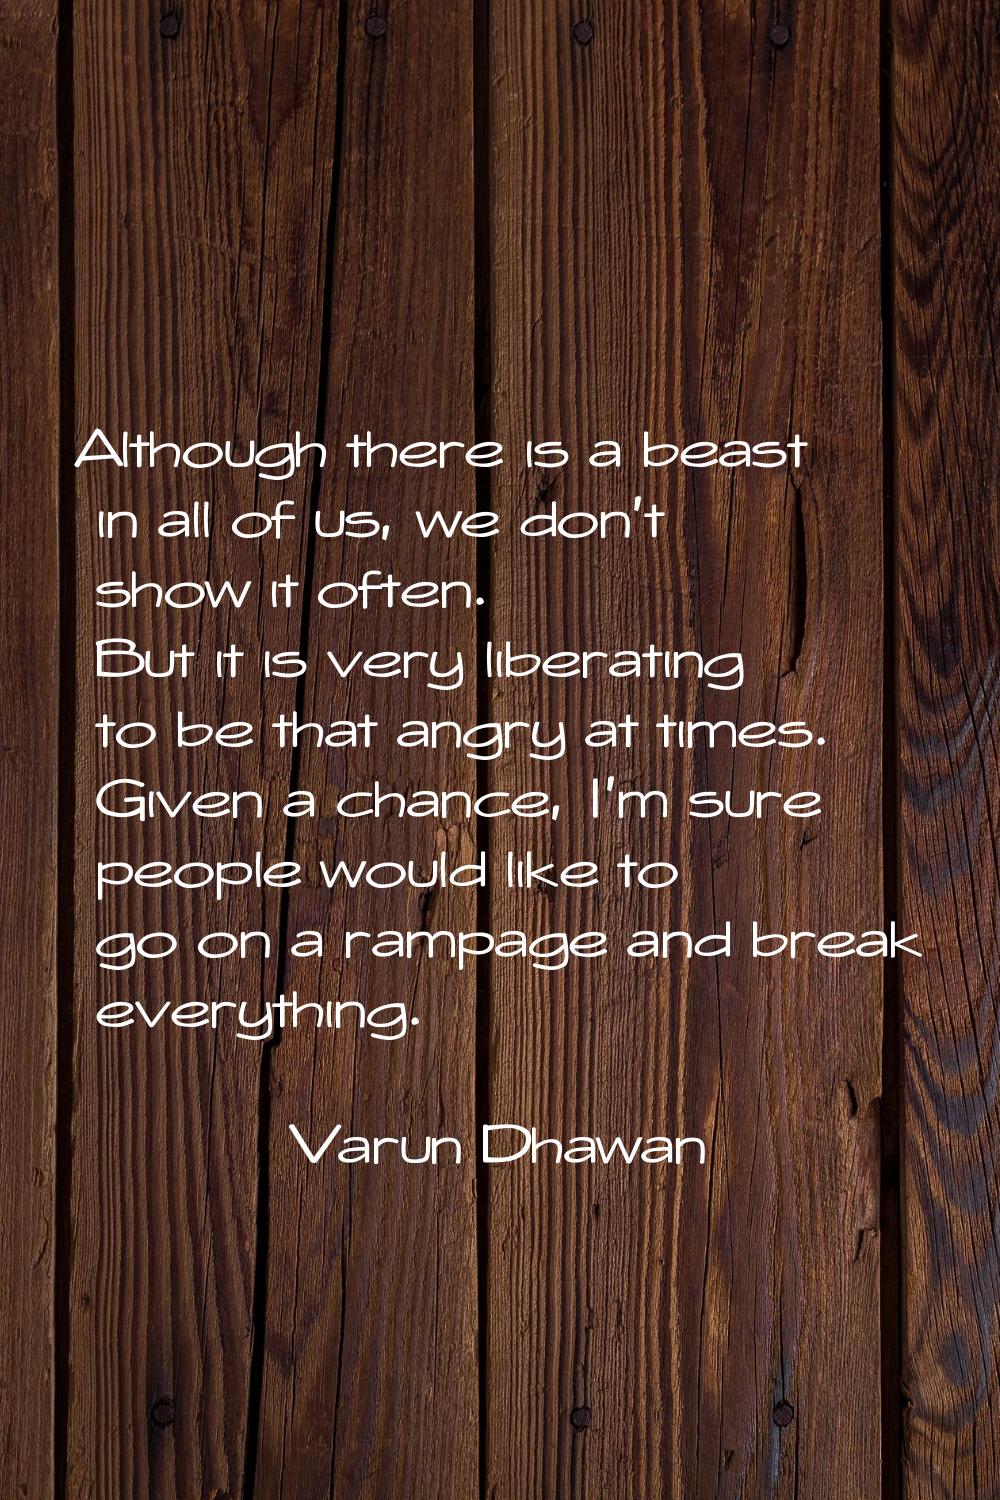 Although there is a beast in all of us, we don't show it often. But it is very liberating to be tha